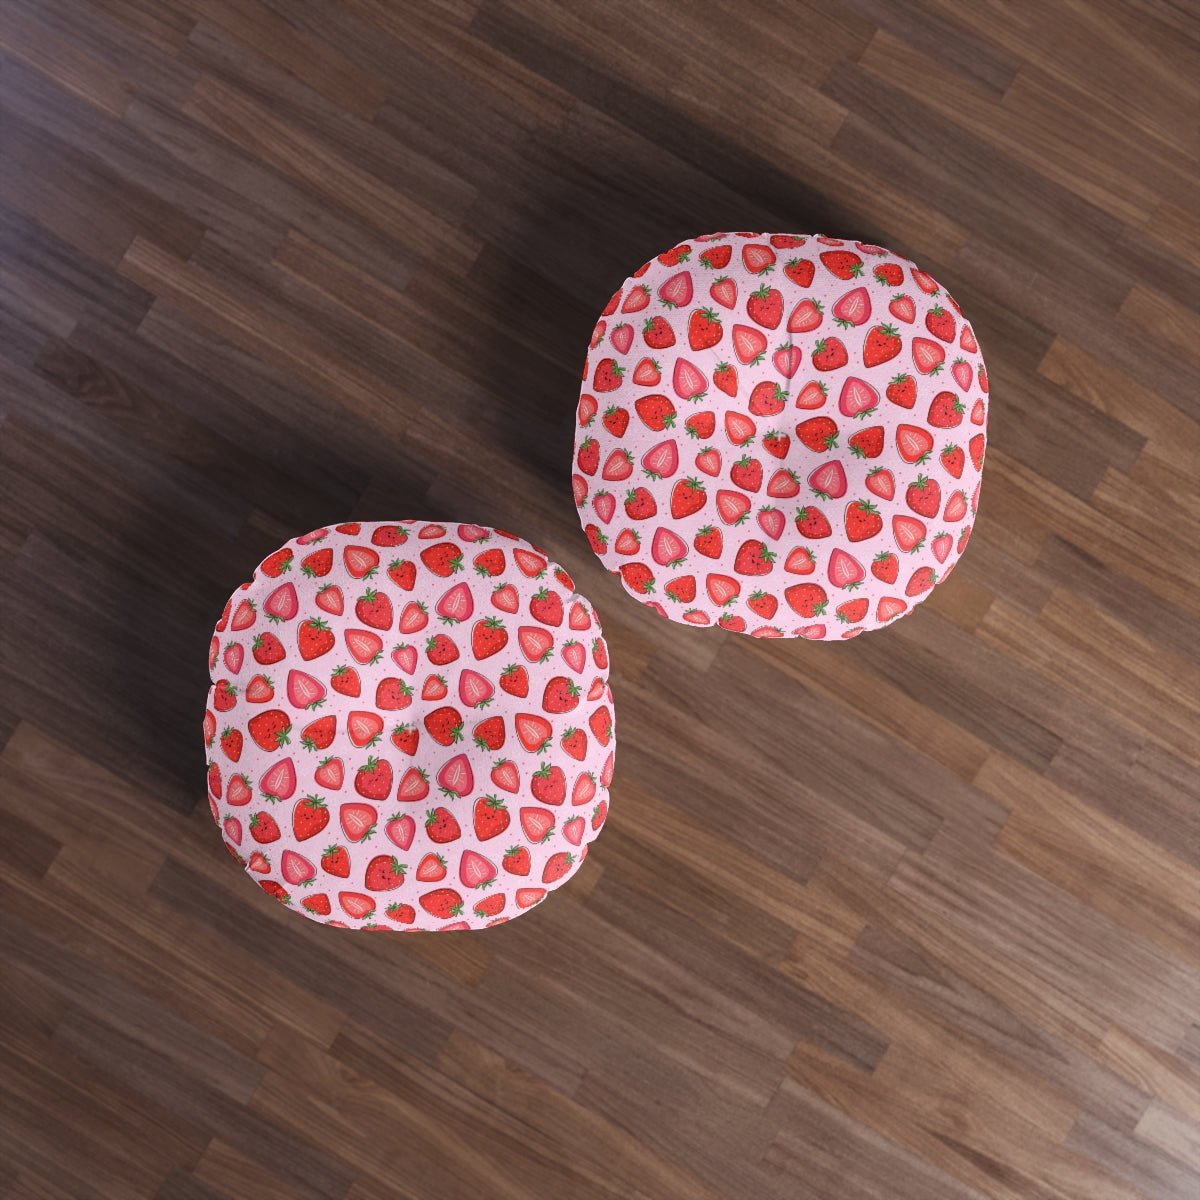 Kawaii Strawberries Round Tufted Floor Pillow - Puffin Lime